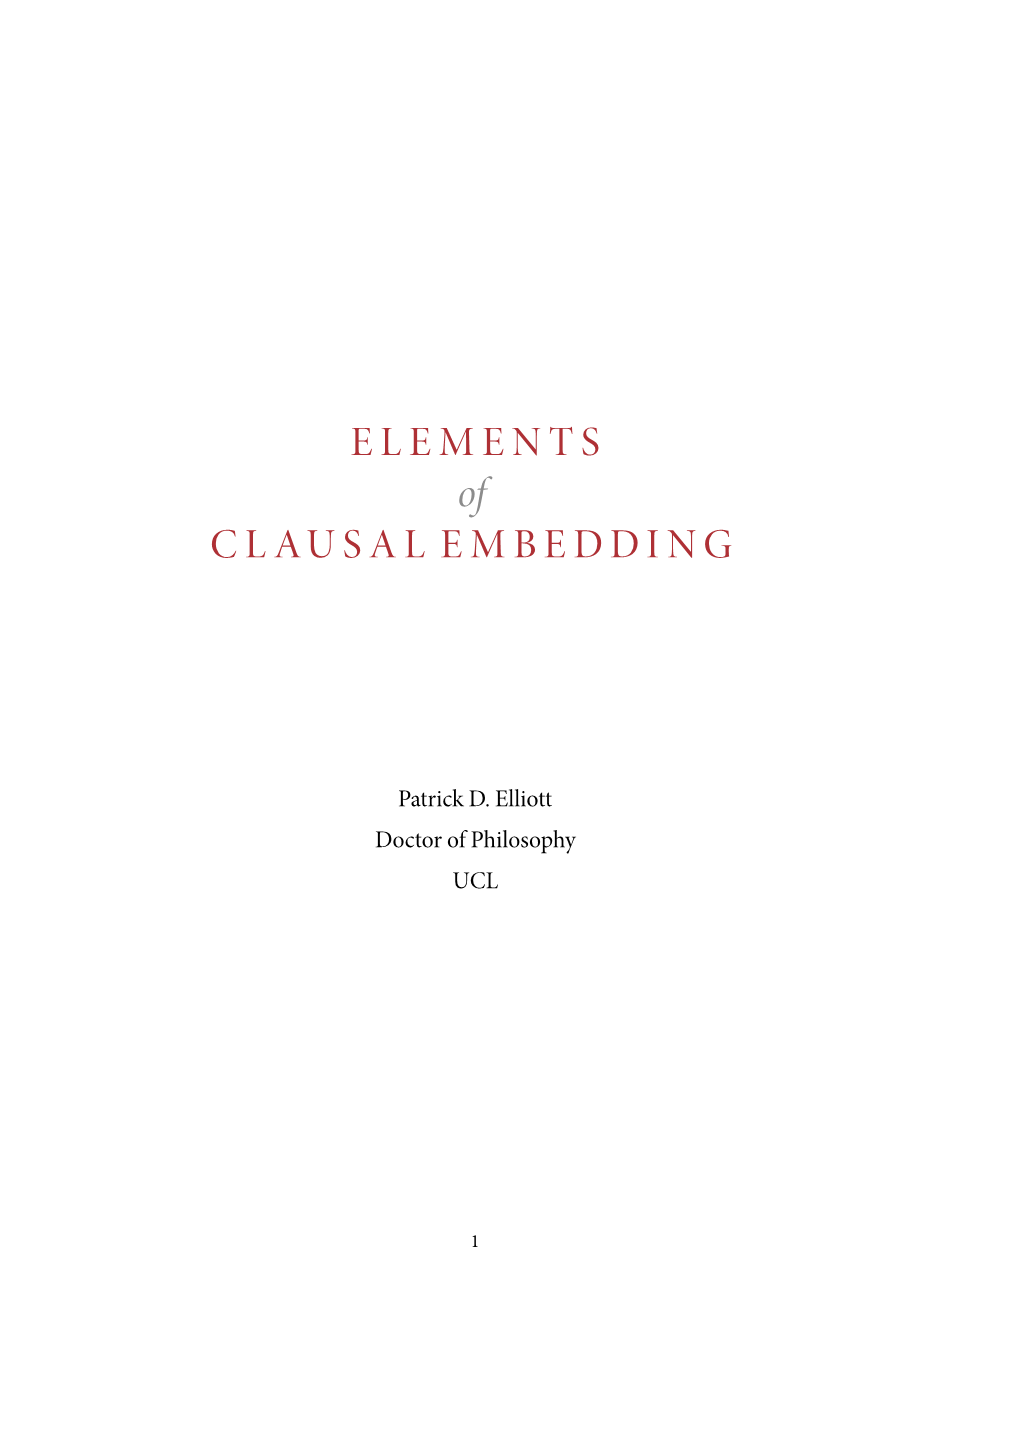 Elements of Clausal Embedding